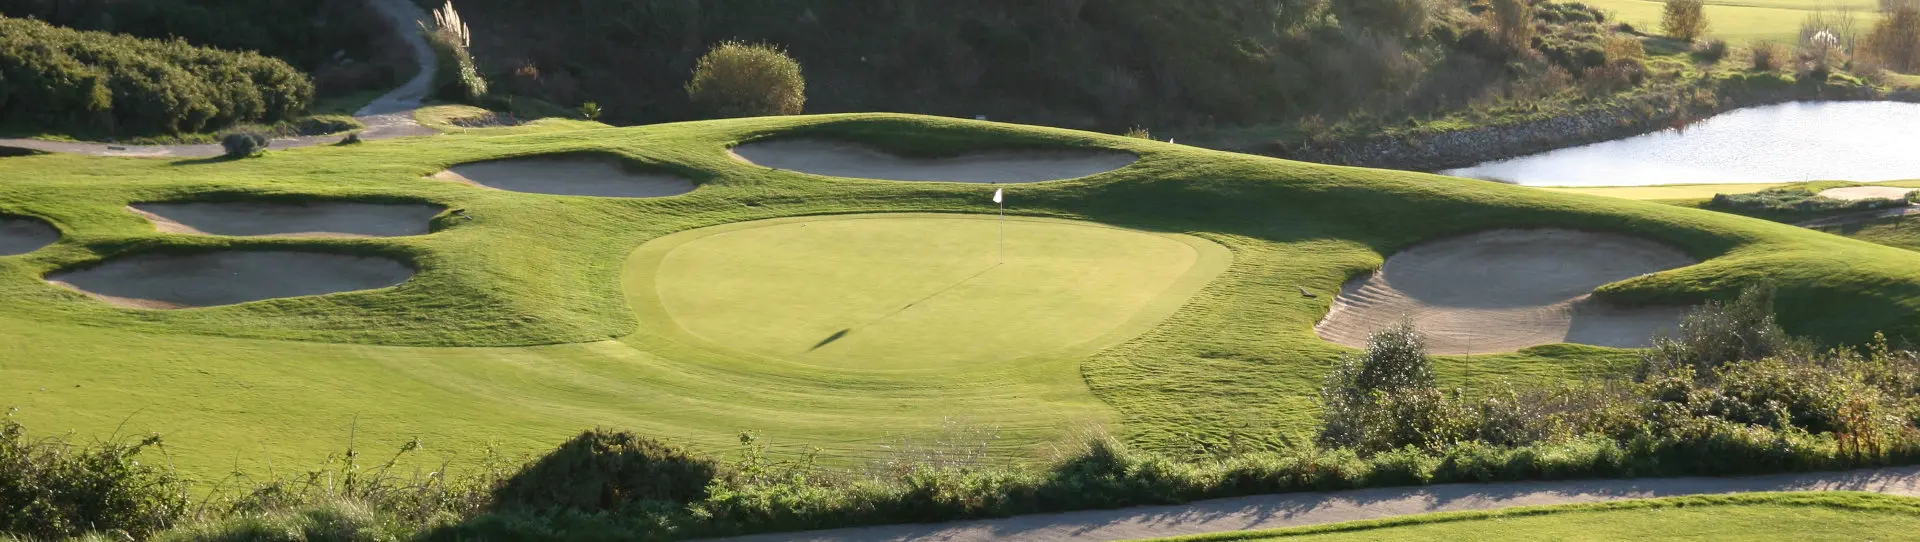 Portugal golf courses - Belas Clube Campo - Photo 3